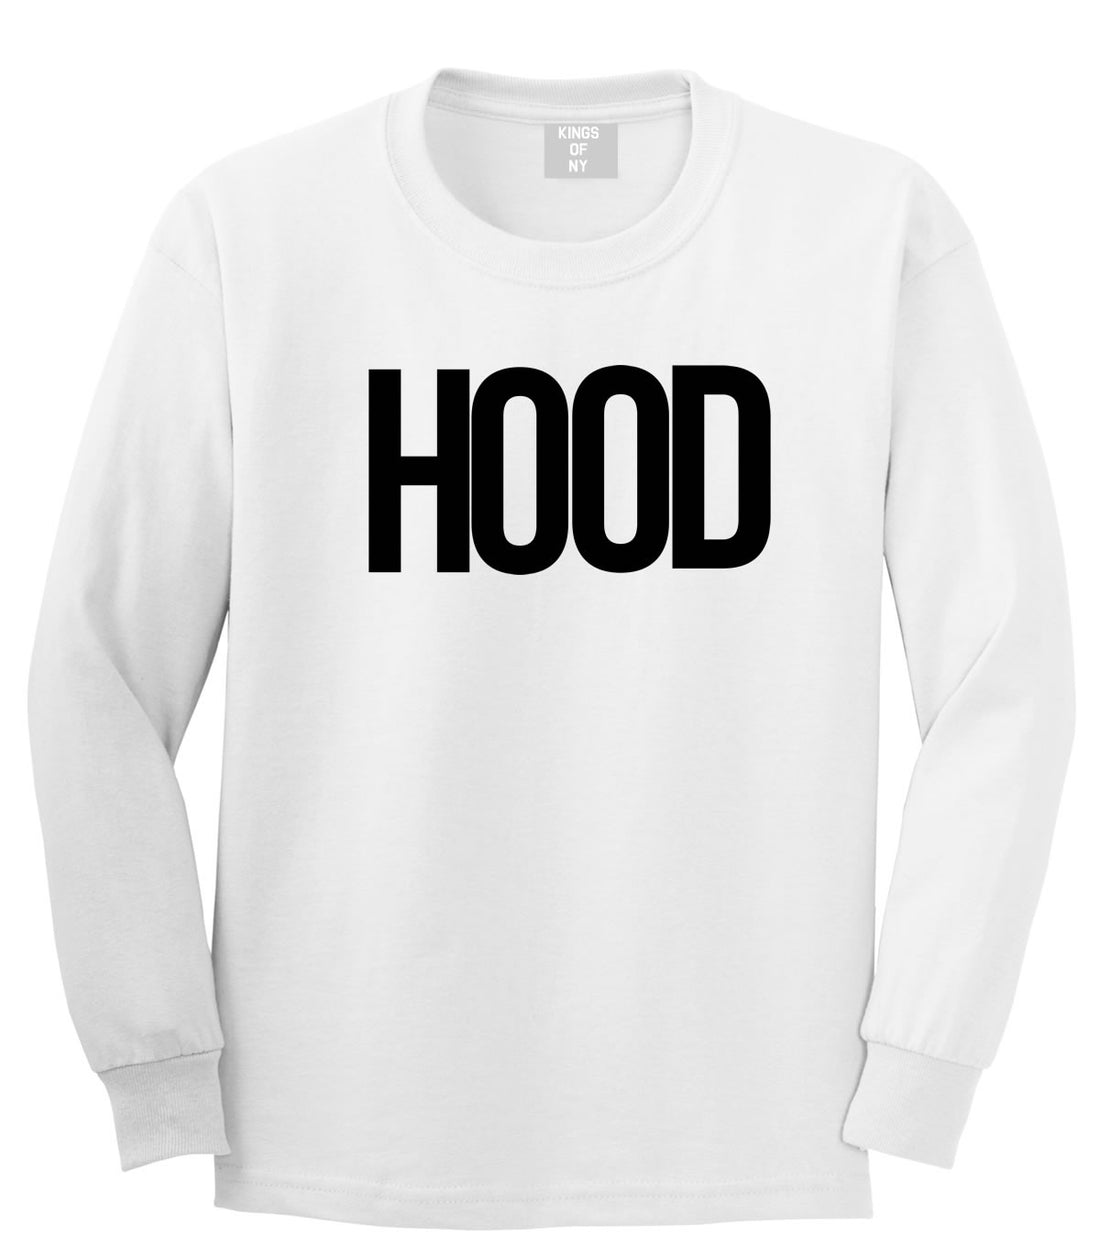 Hood Trap Style Compton New York Air Long Sleeve T-Shirt in White by Kings Of NY